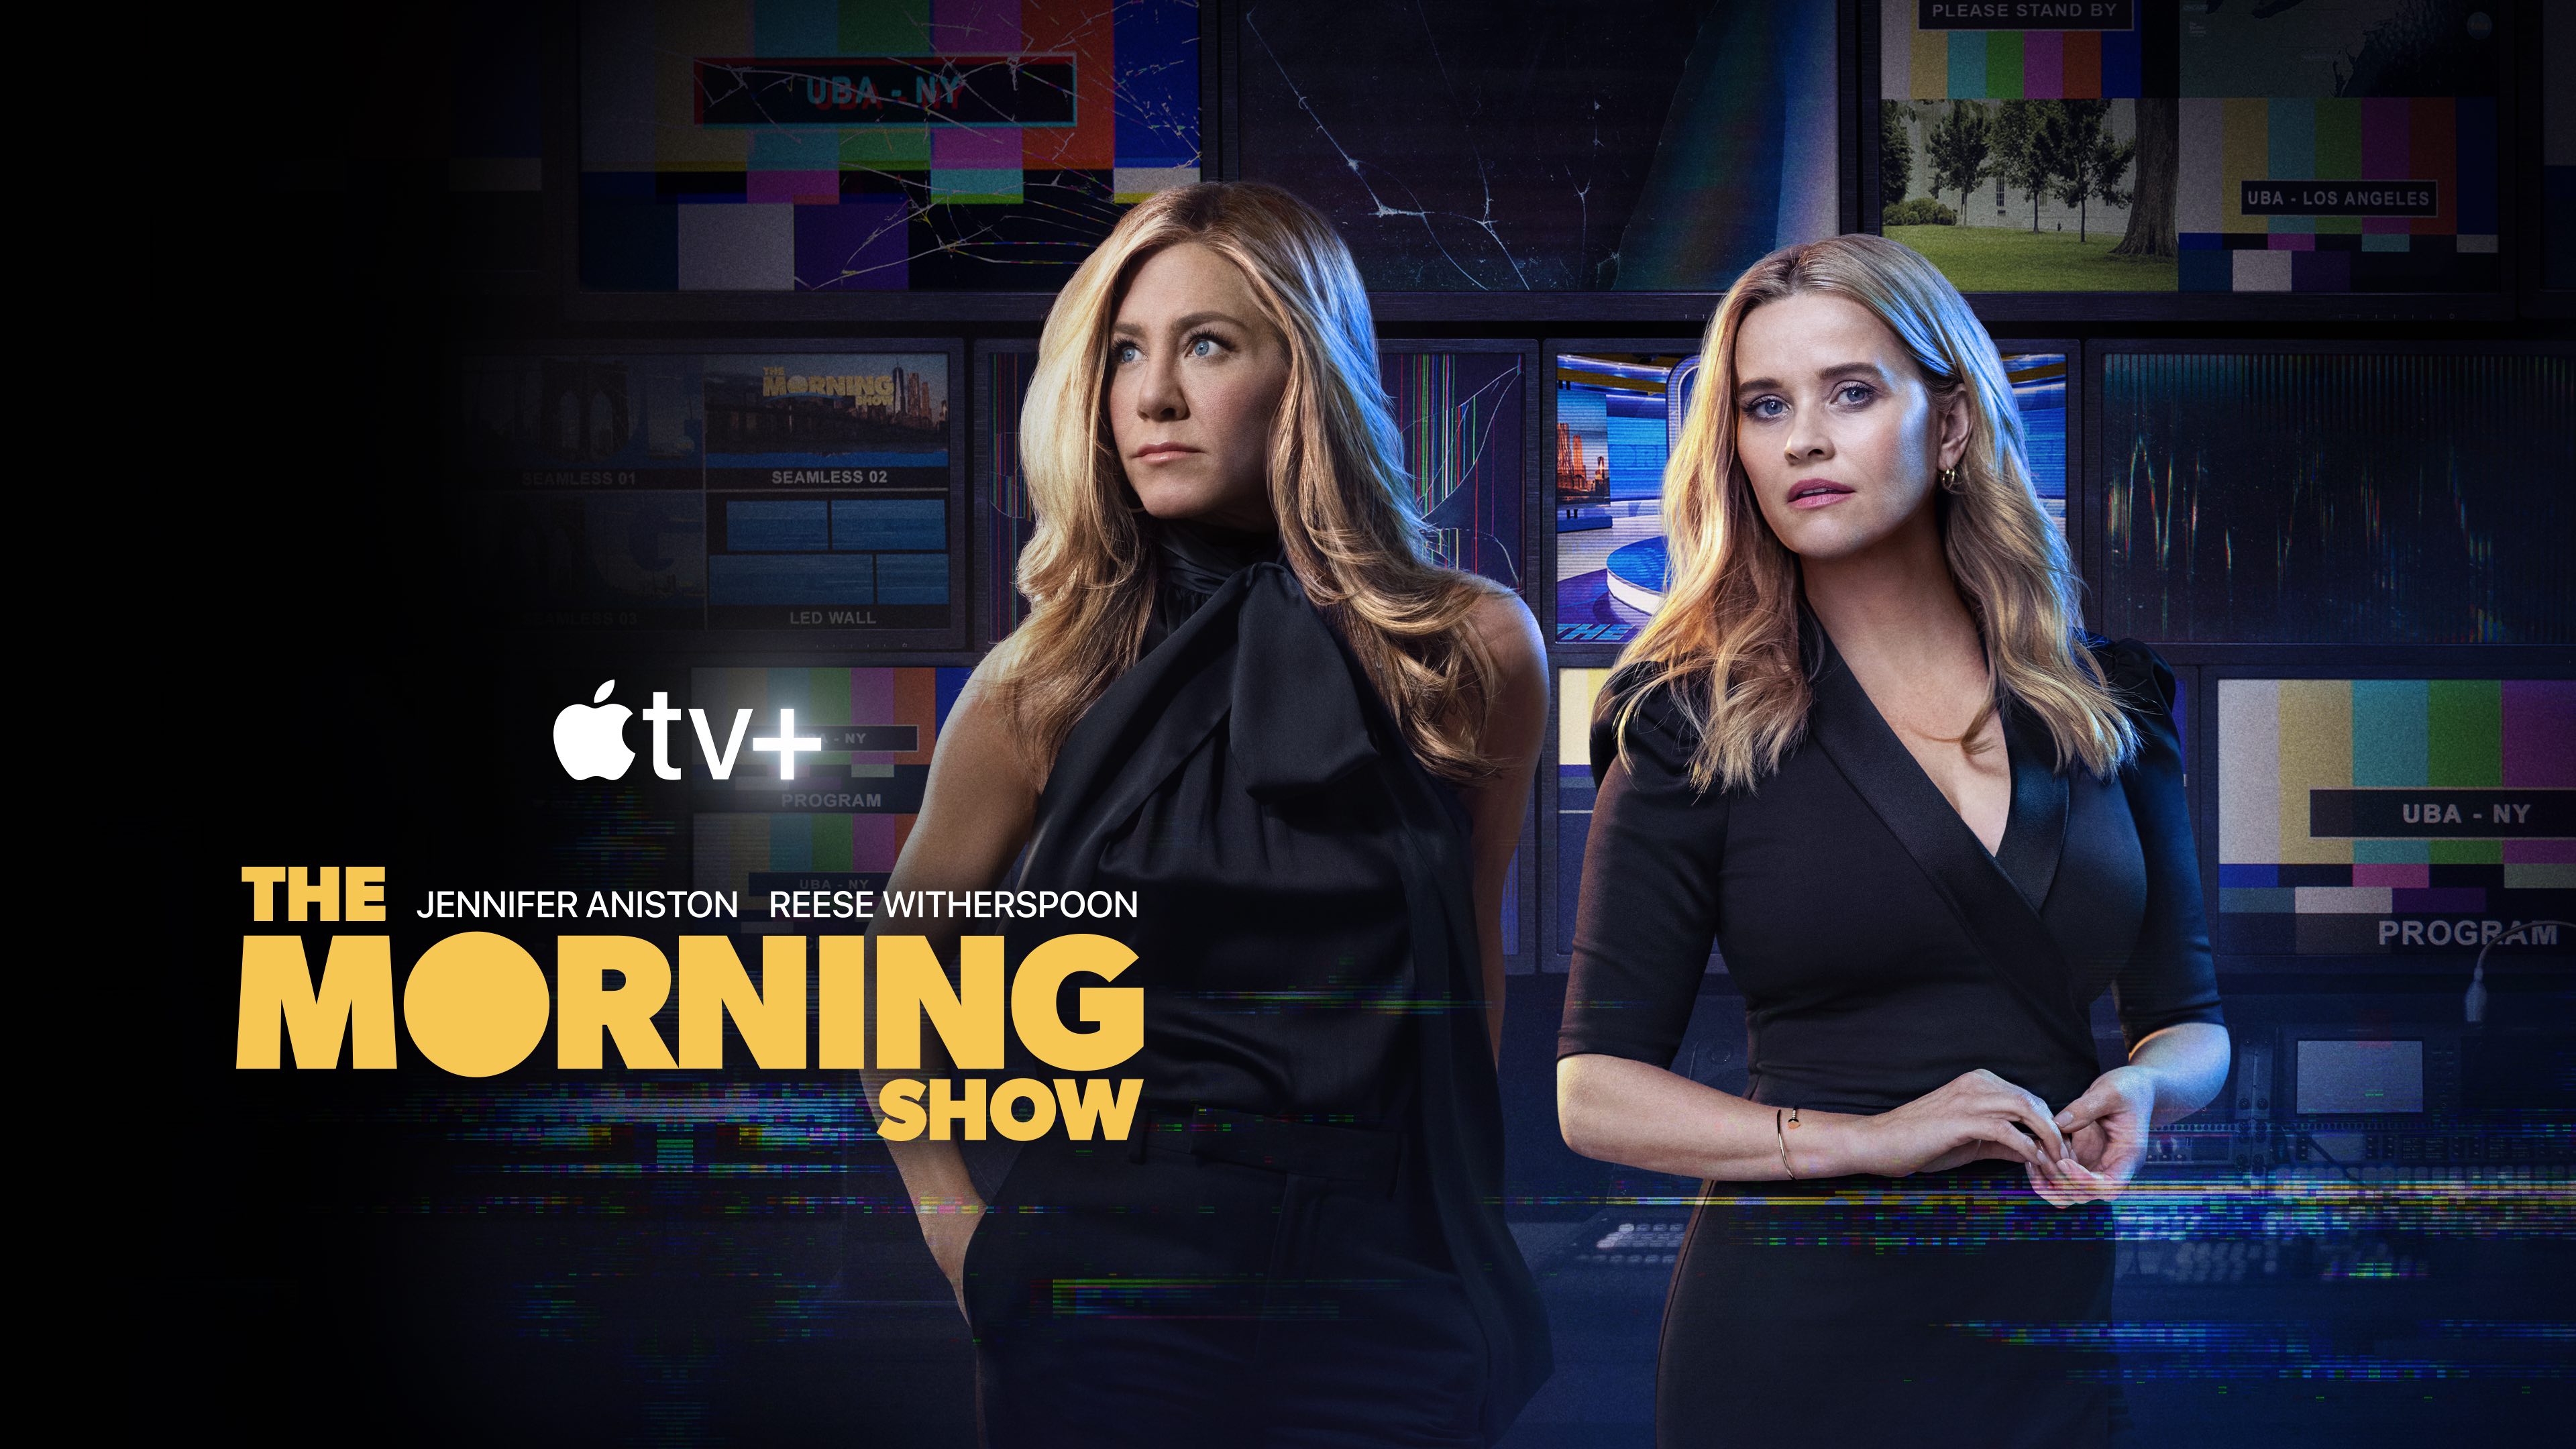 The Morning Show Cast - Every Actor and Character in the Apple TV+ Series